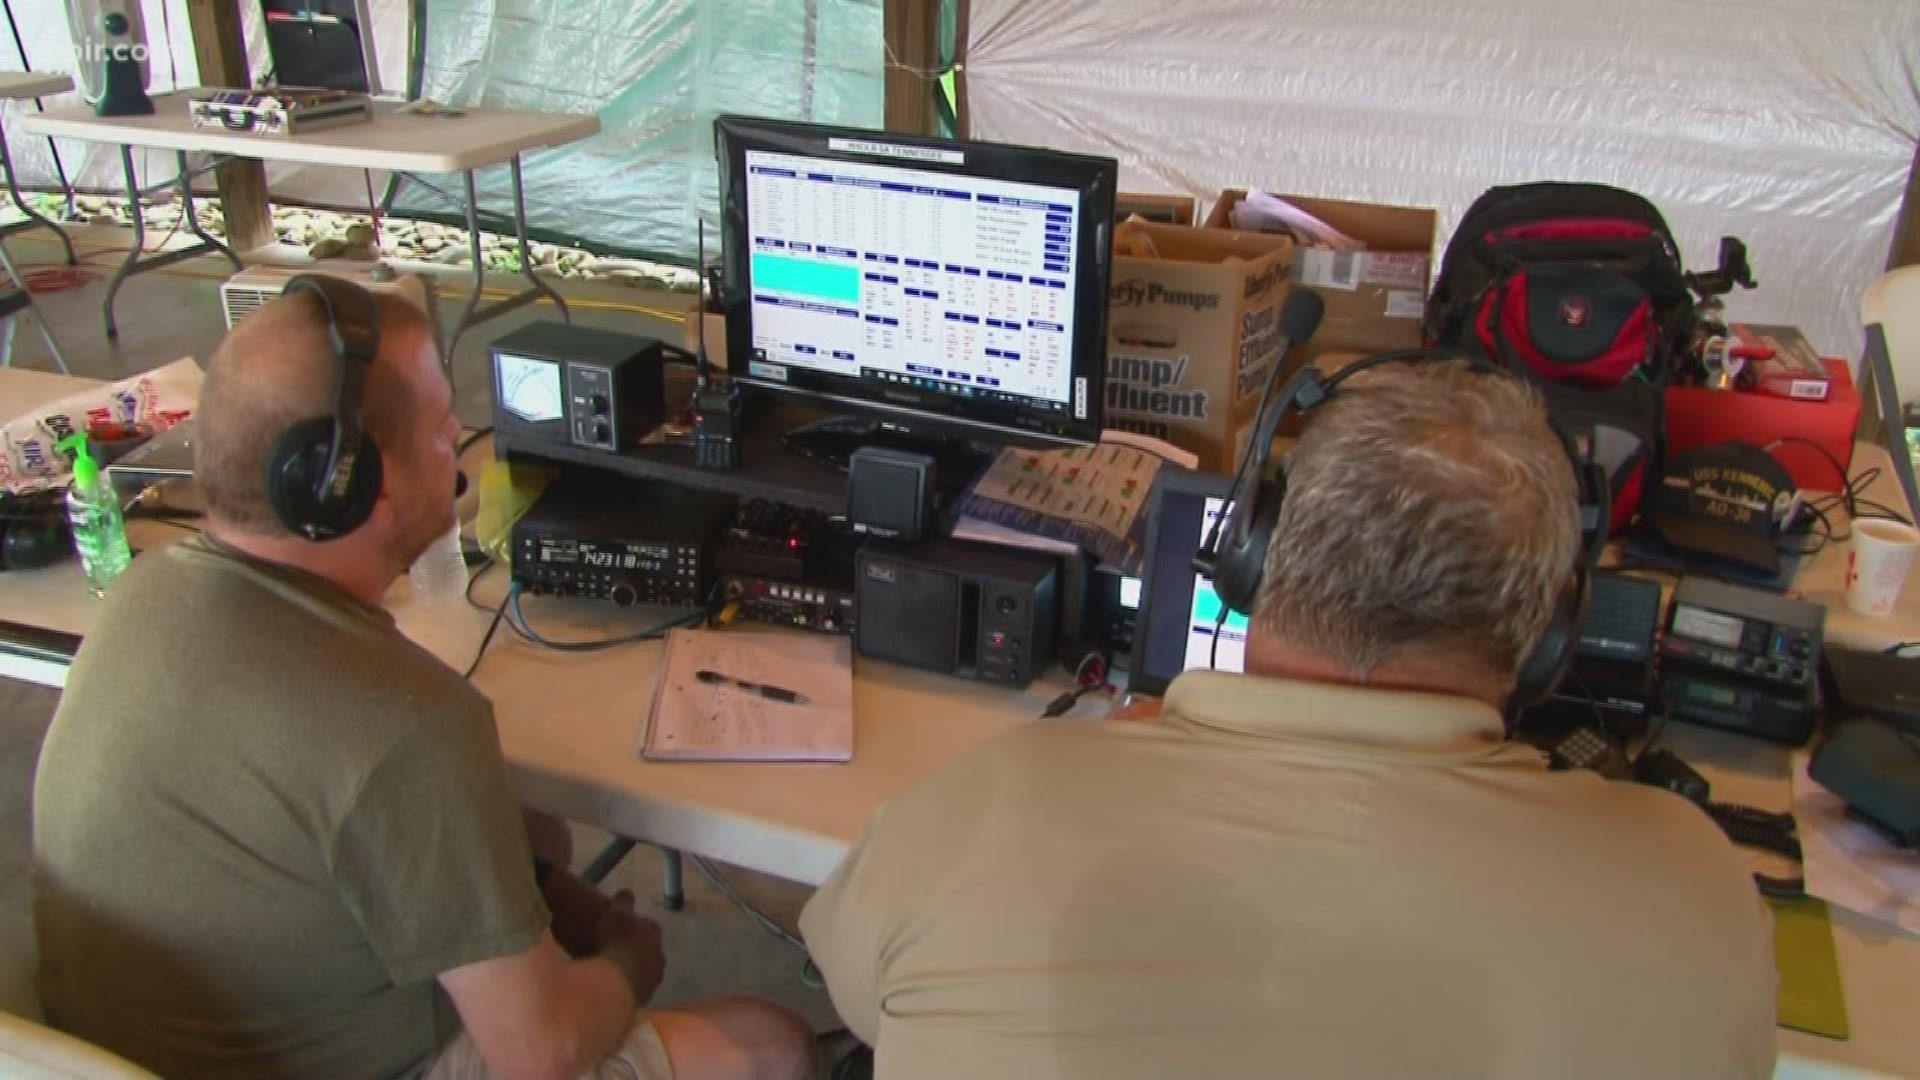 The Smoky Mountain Amateur Radio Club hosted a way for operators to practice communicating during an emergency.